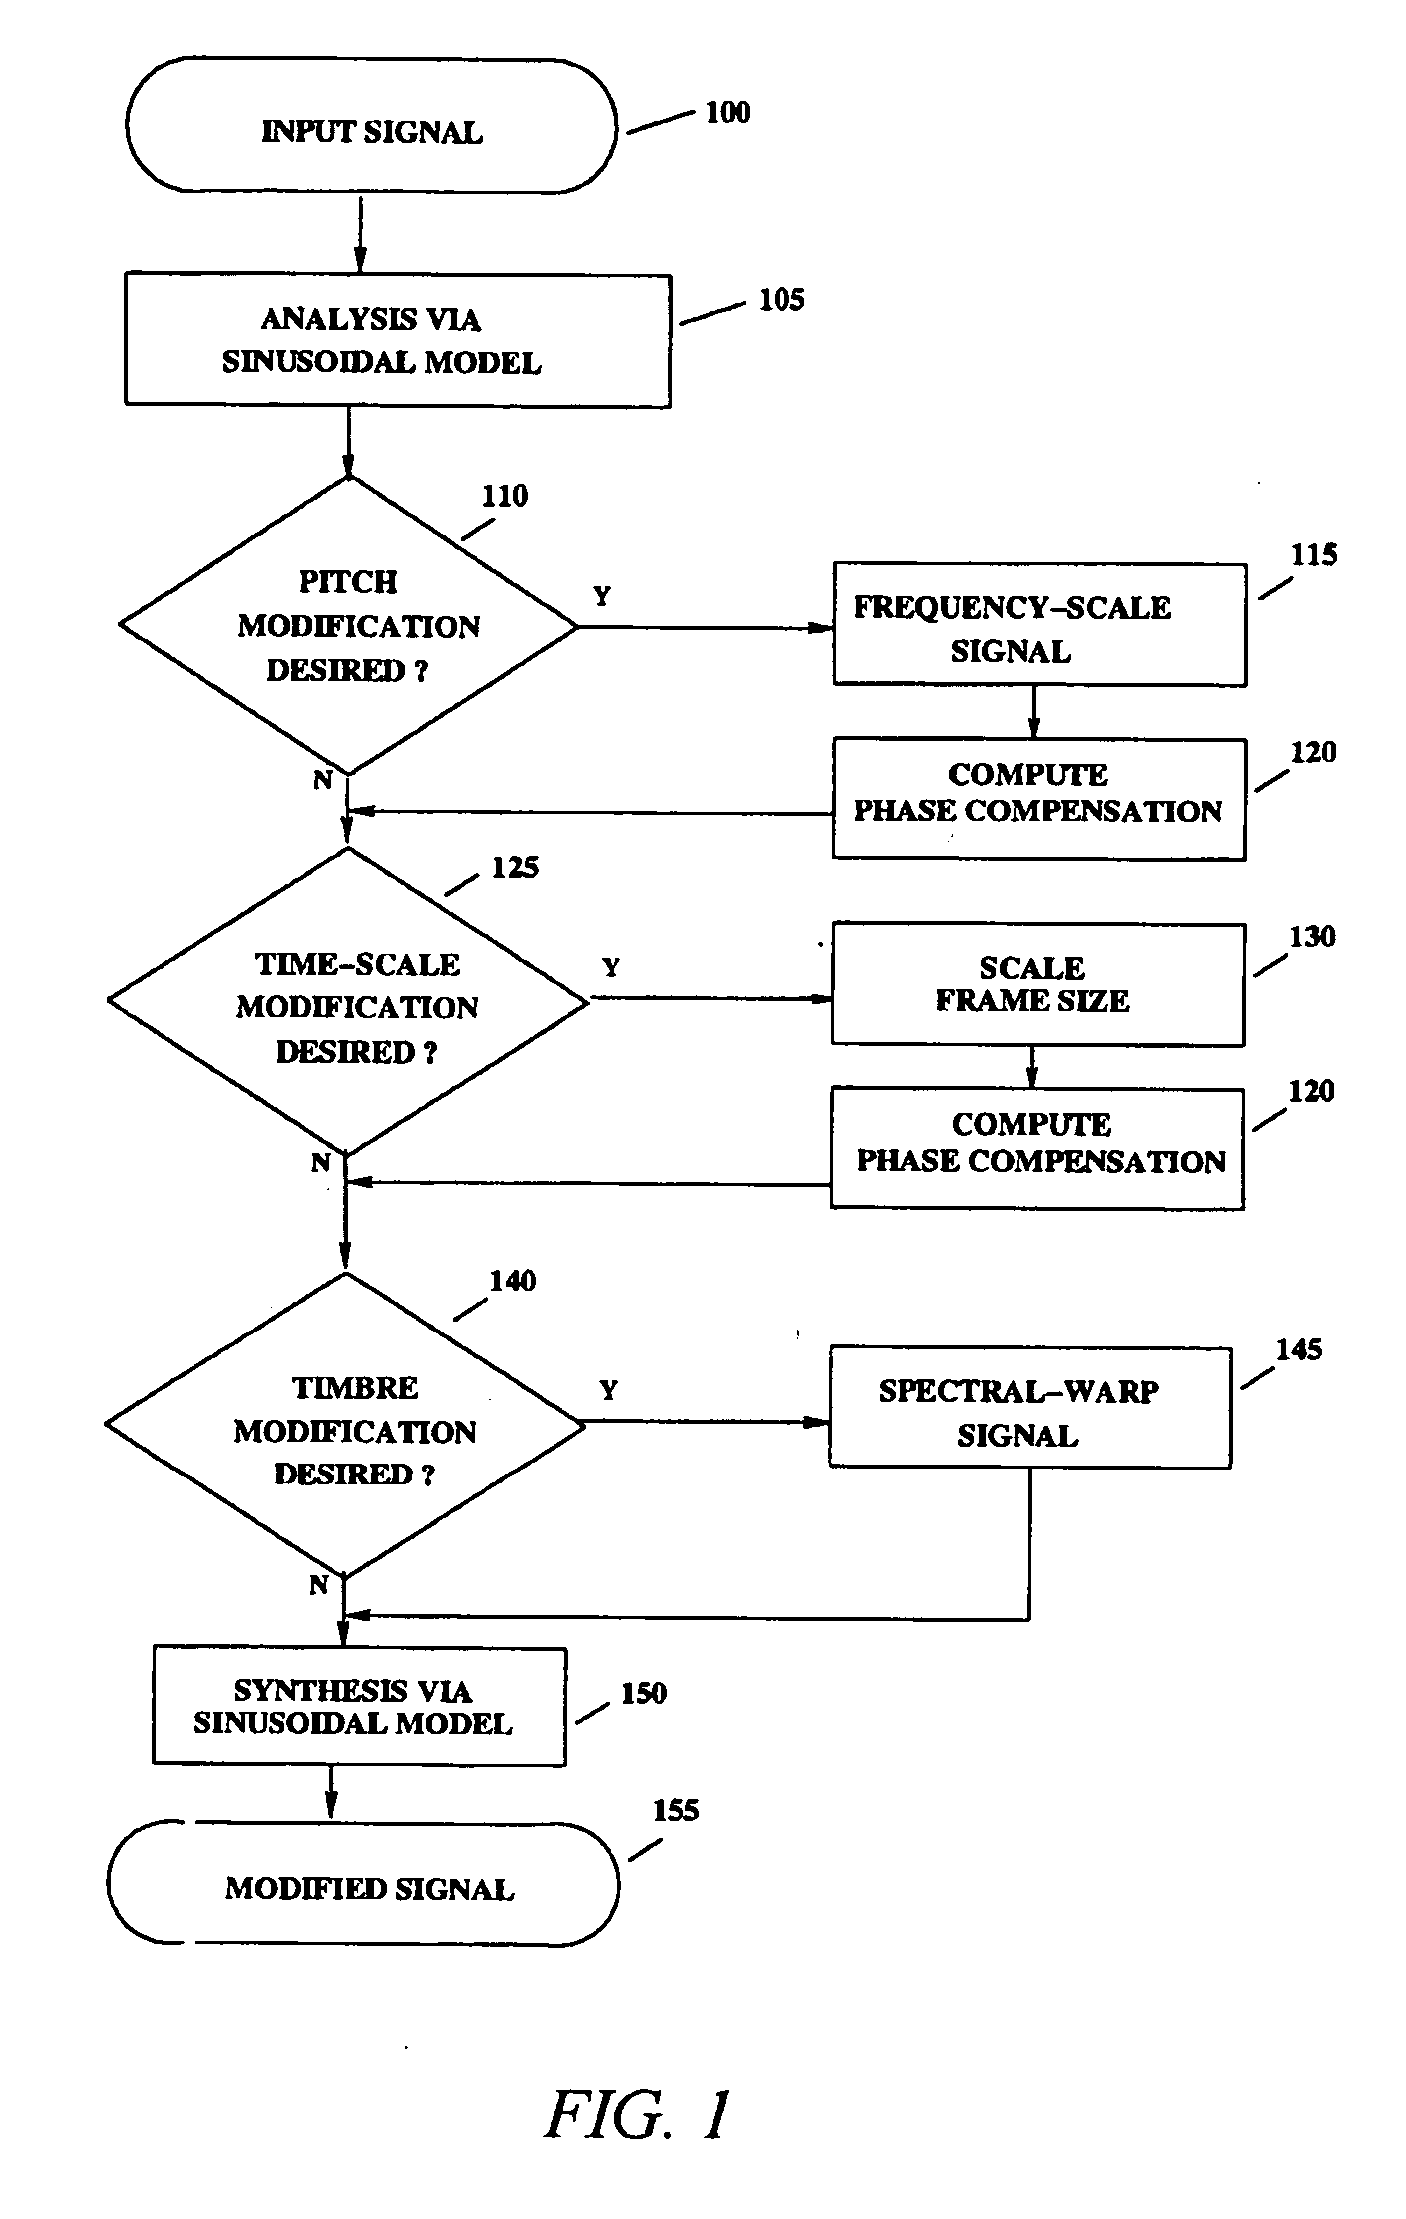 Modification of acoustic signals using sinusoidal analysis and synthesis